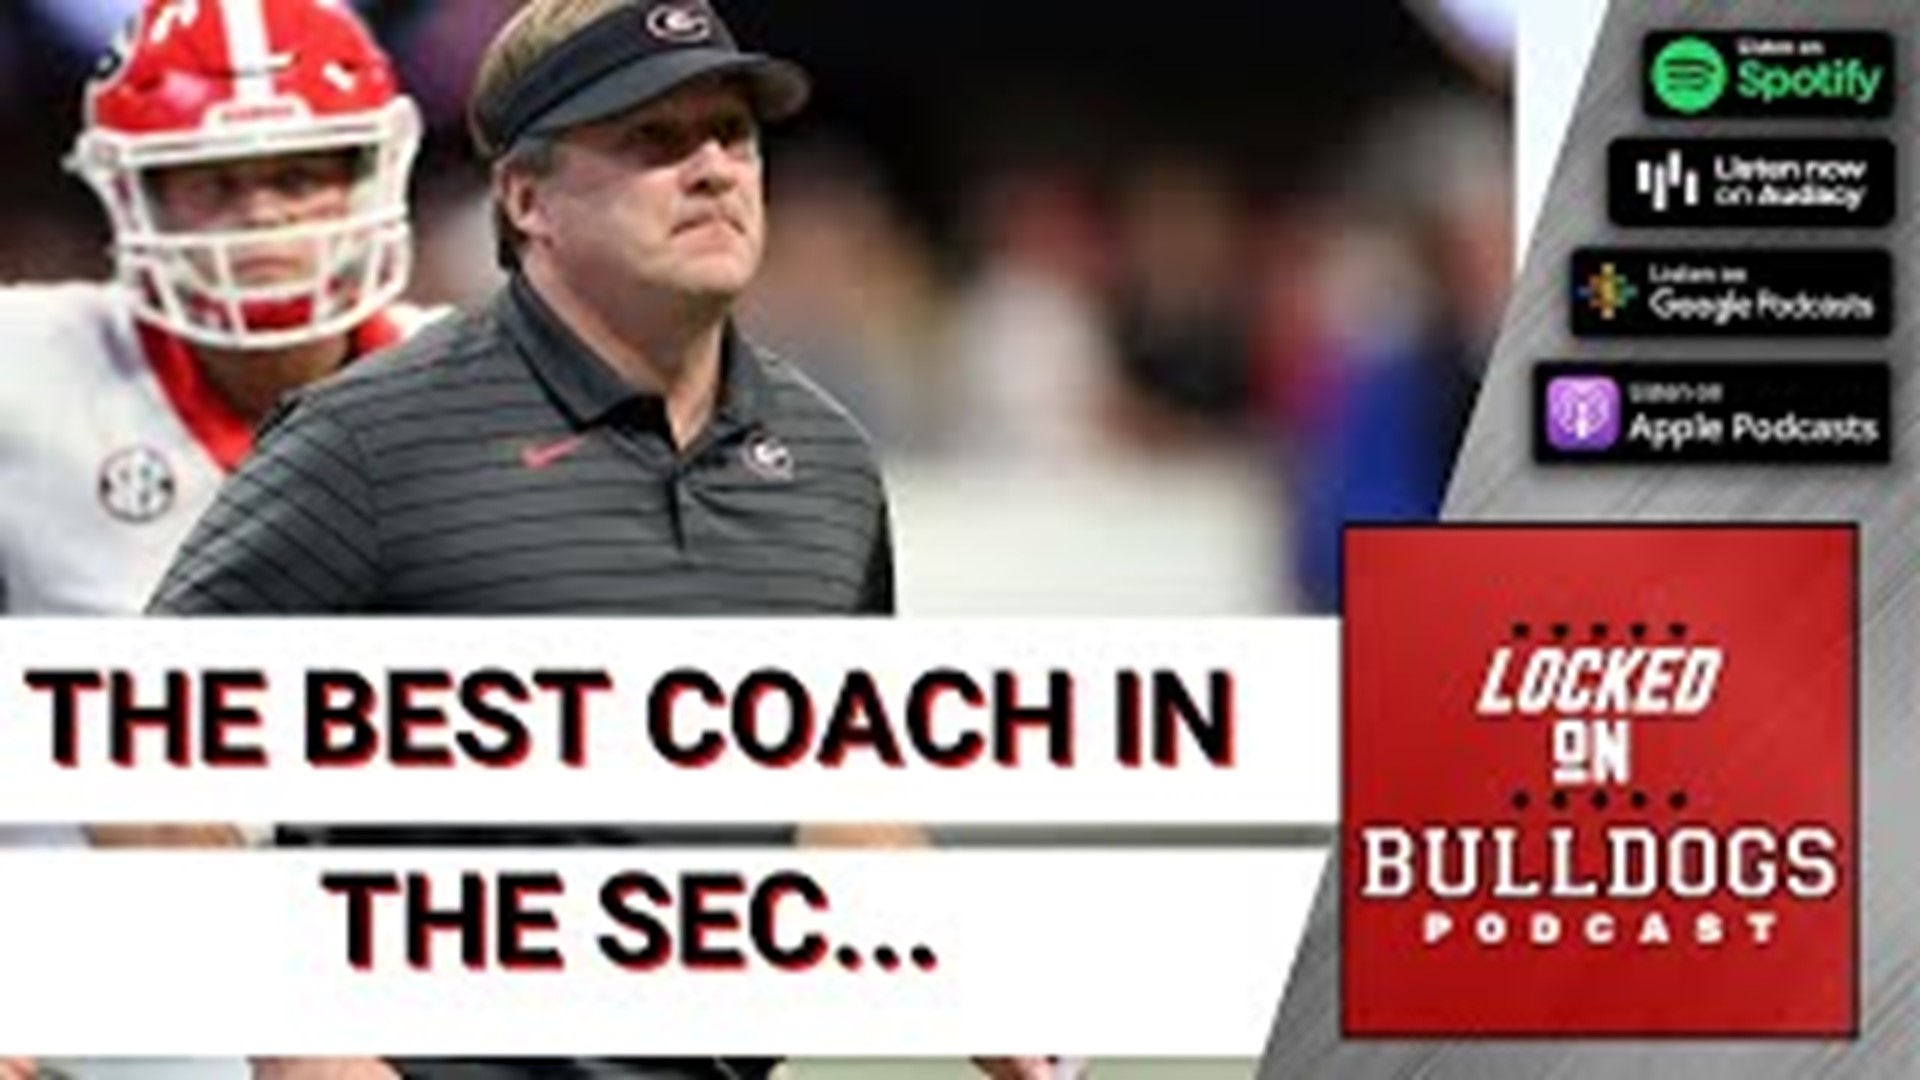 SEC Coaches Ranked 1-14. You know who #1 is, don't you?